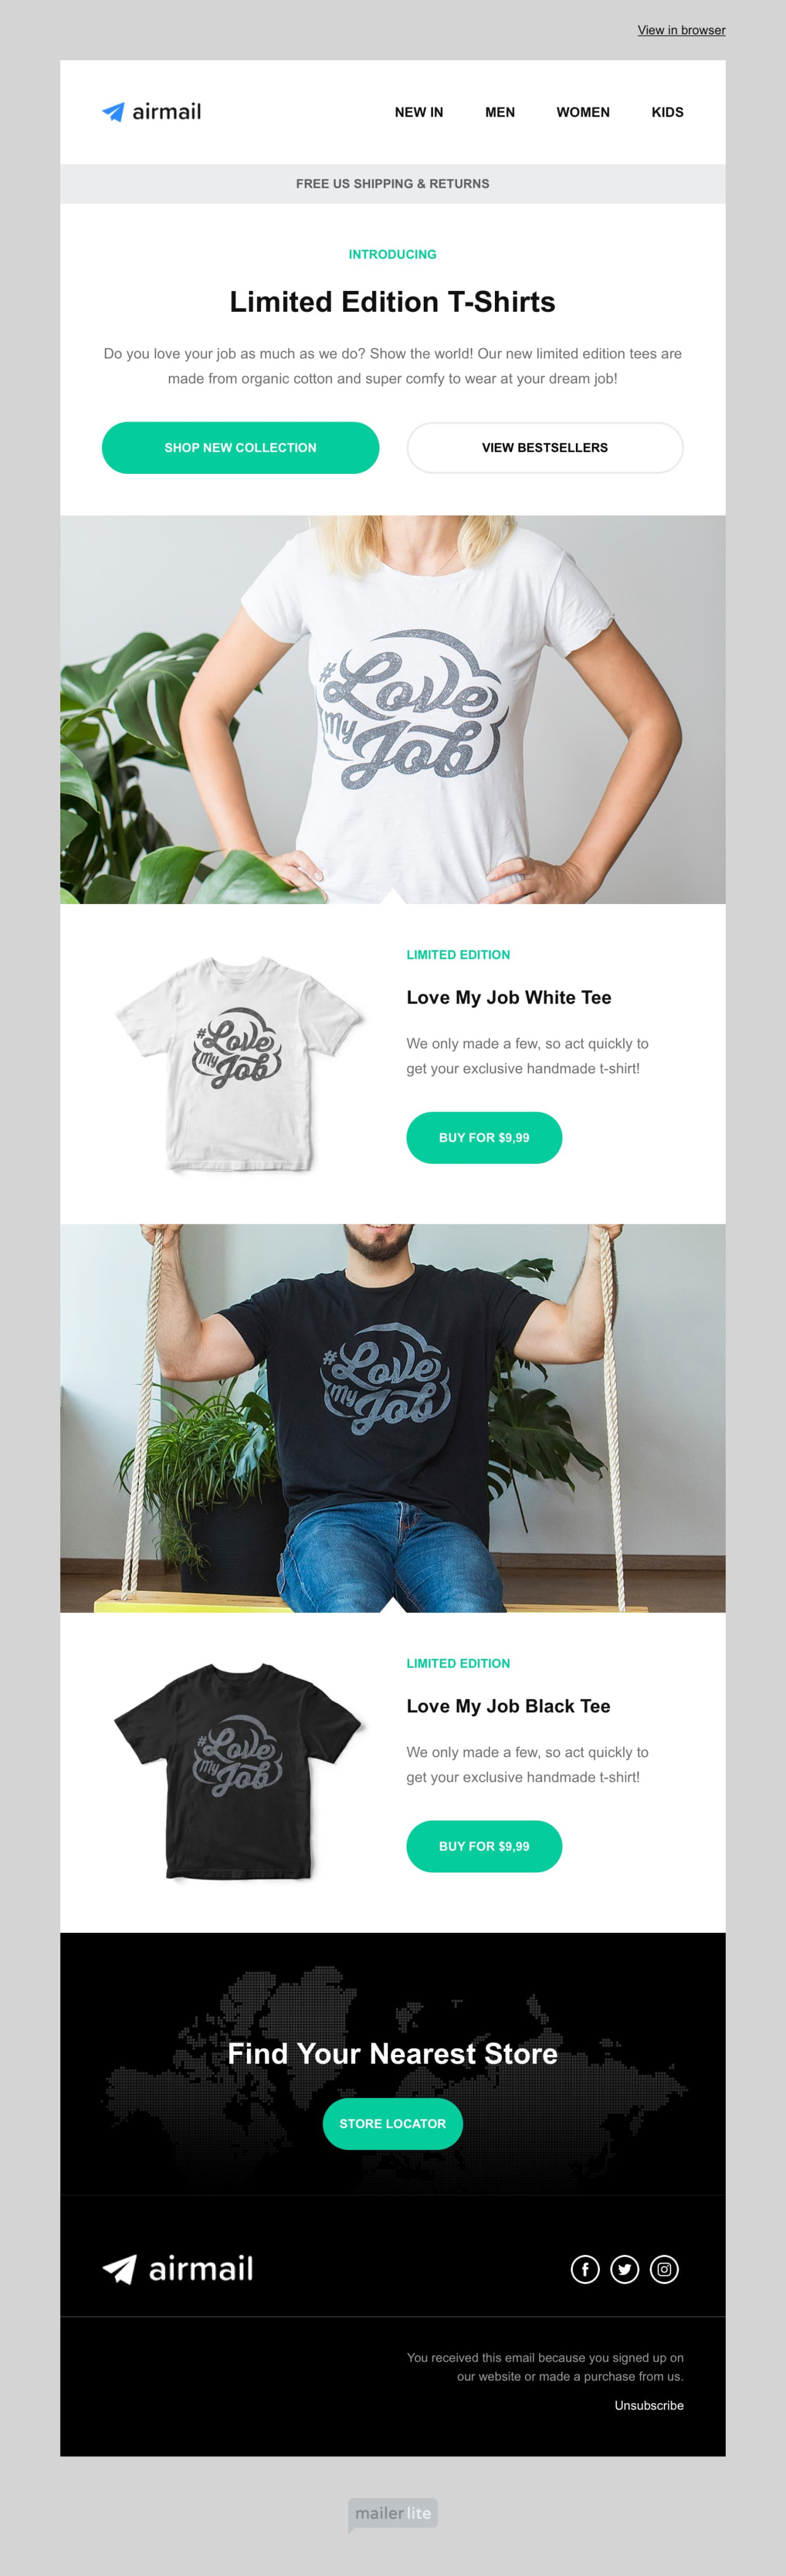 E-commerce limited edition offer template - Made by MailerLite